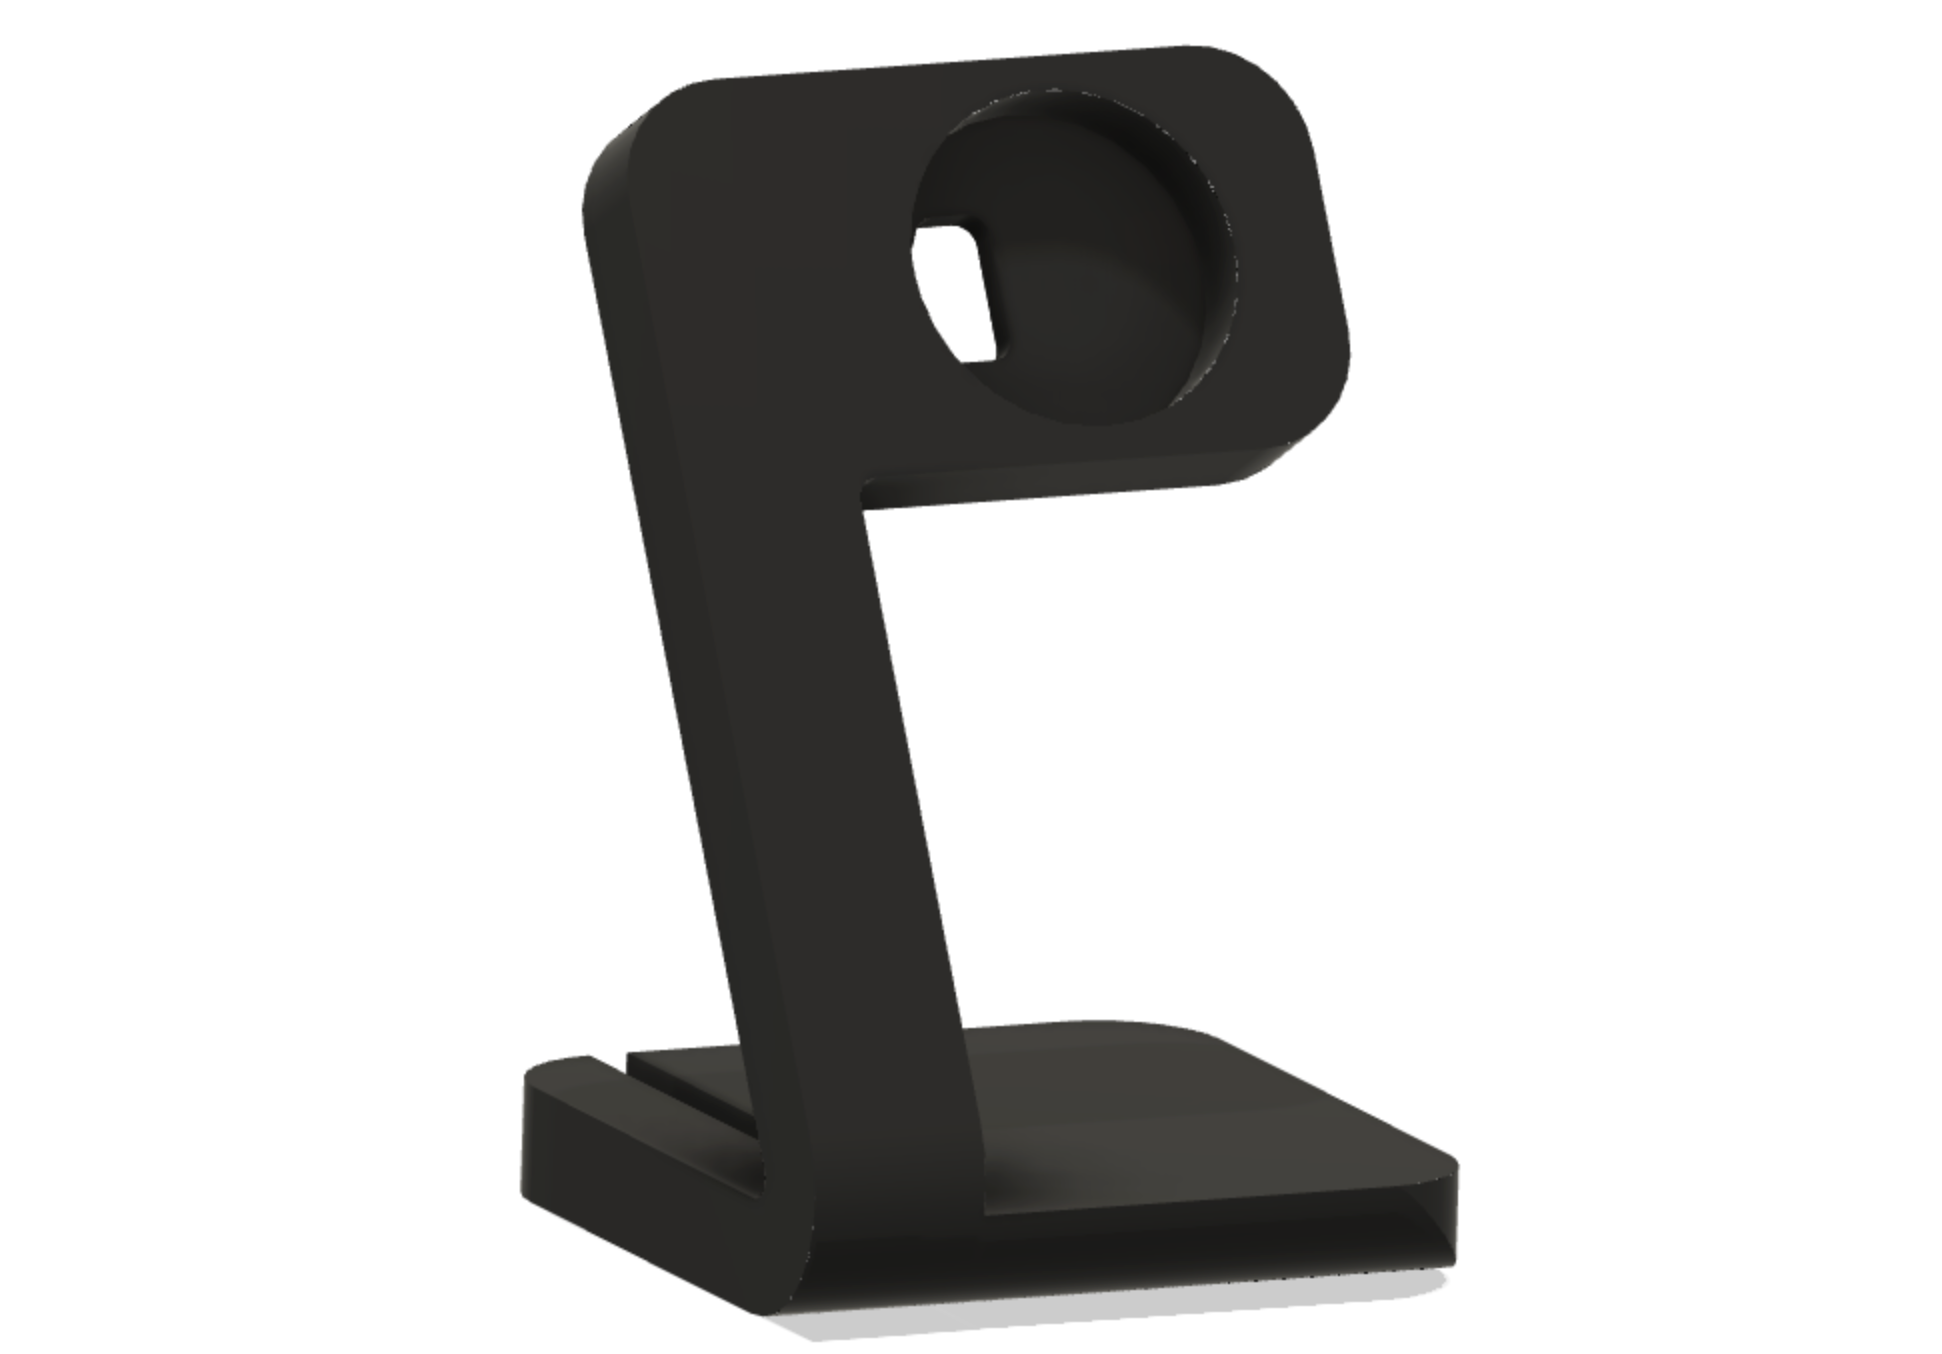 Apple Watch charging stand by Giuseppe Alberti | Download free STL ...